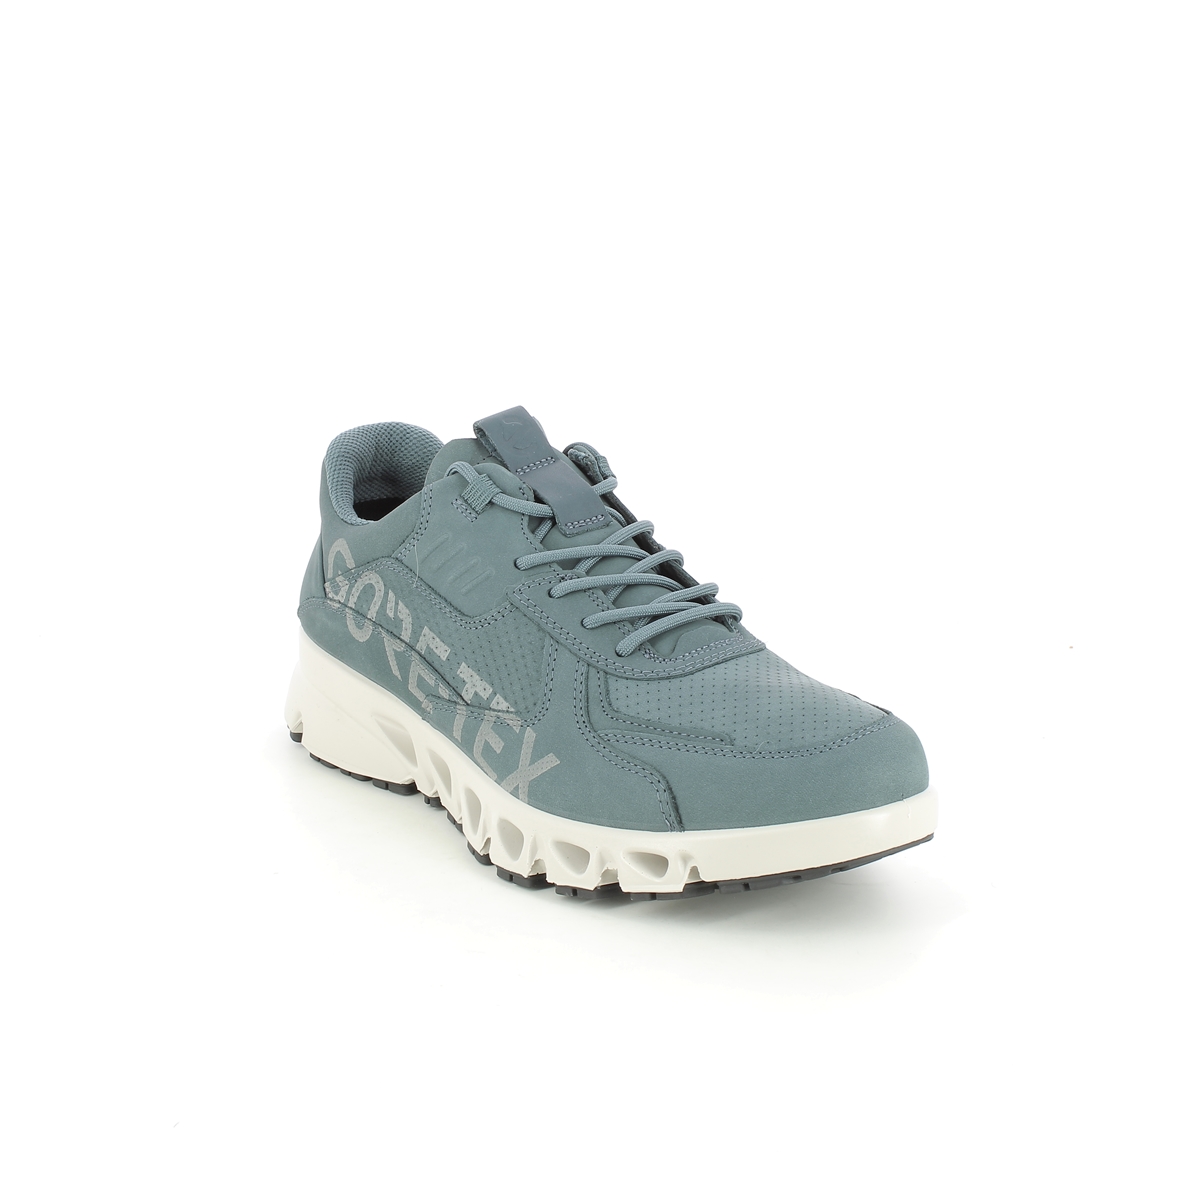 ECCO Surround Mens Gtx Petrol nubuck Mens trainers 880254-02159 in a Plain Leather in Size 42